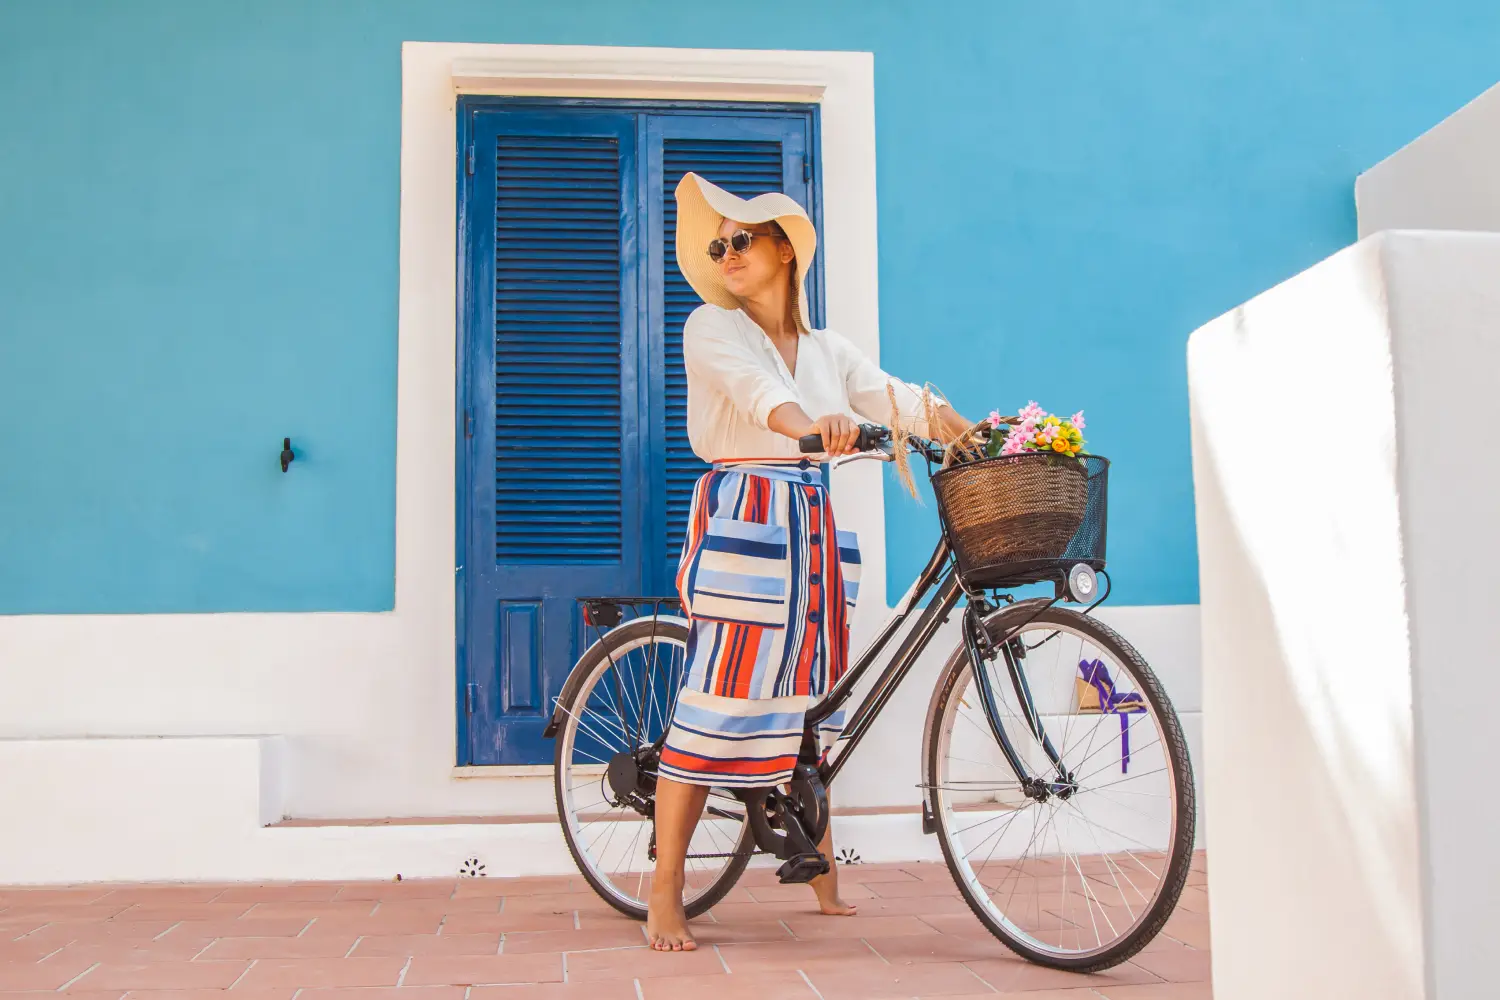 Ferry to Ponza - Beautiful young girl with bicycle in front of a blue house wearing colorful fashion dress with large hat in Sunny summer in Ponza island, Italy.